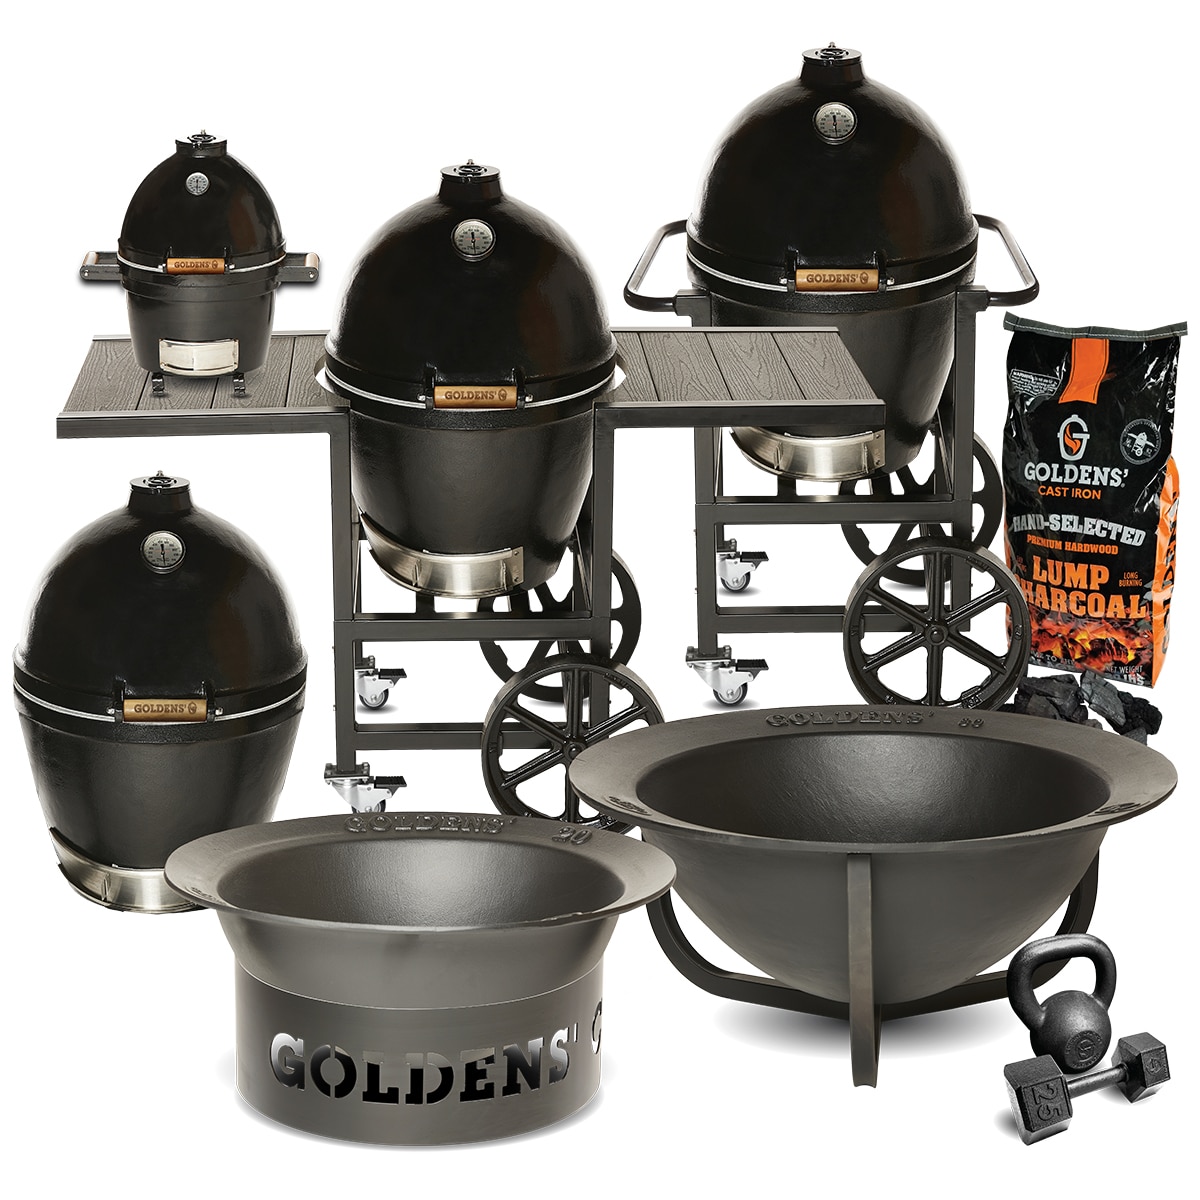 Goldens' Cast Iron Family of Products